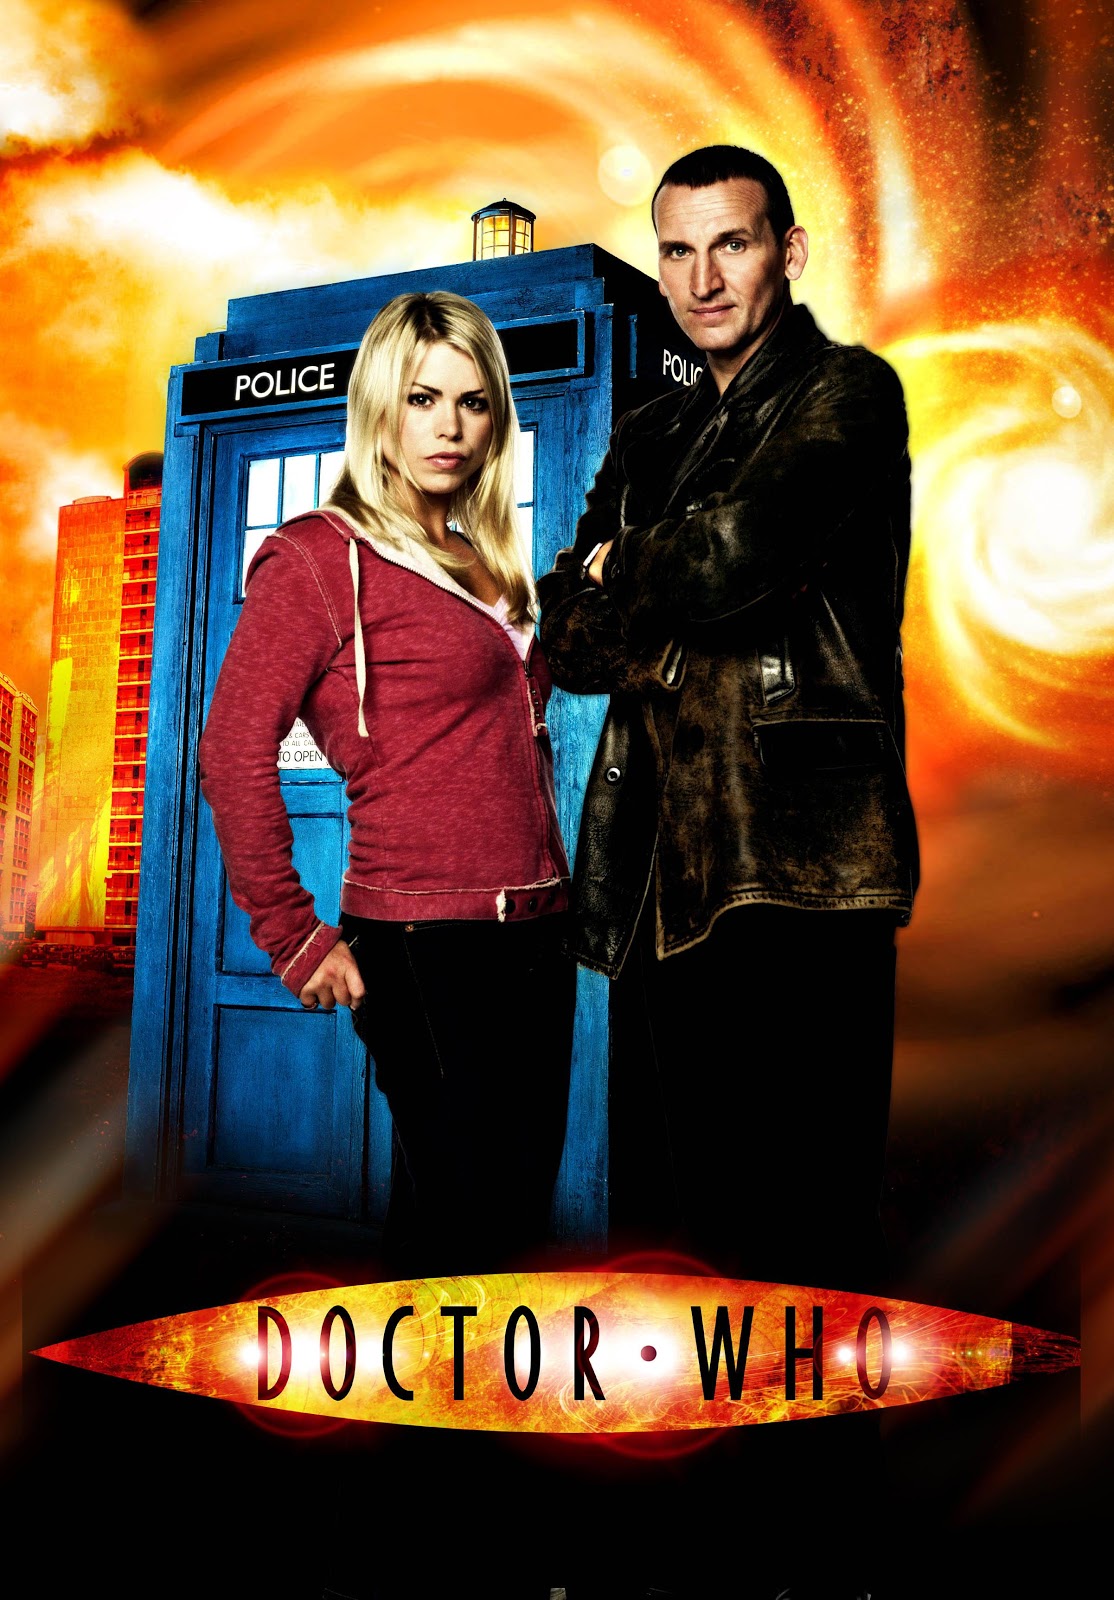 Doctor Who Posters | Tv Series Posters and Cast